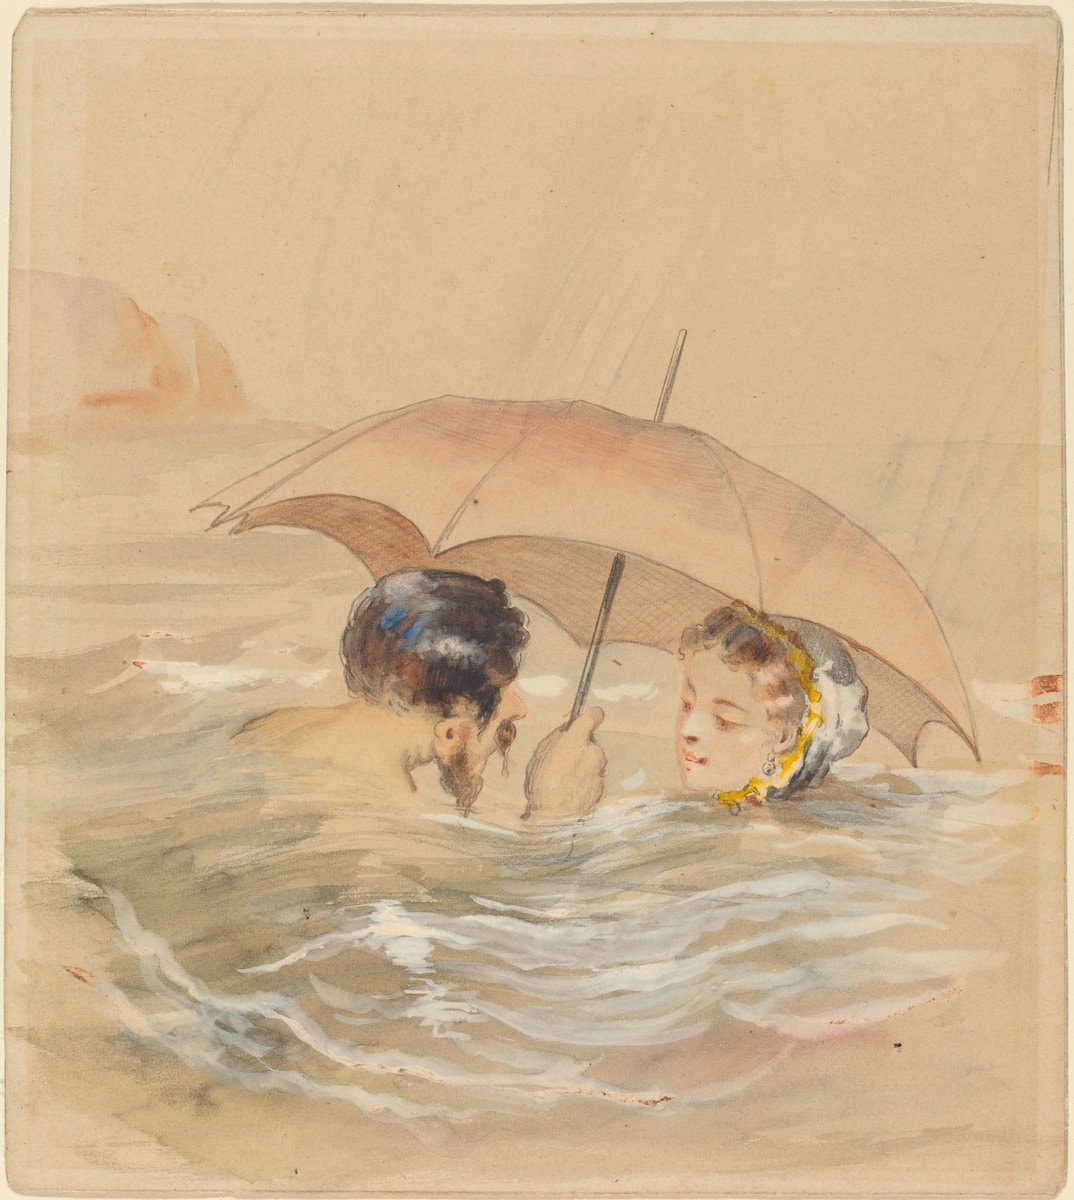 Alfred Grévin. Male and Female Bathers with Umbrella. 1905. Watercolor and gouache over graphite on heavy wove paper. National Gallery of Art, USA